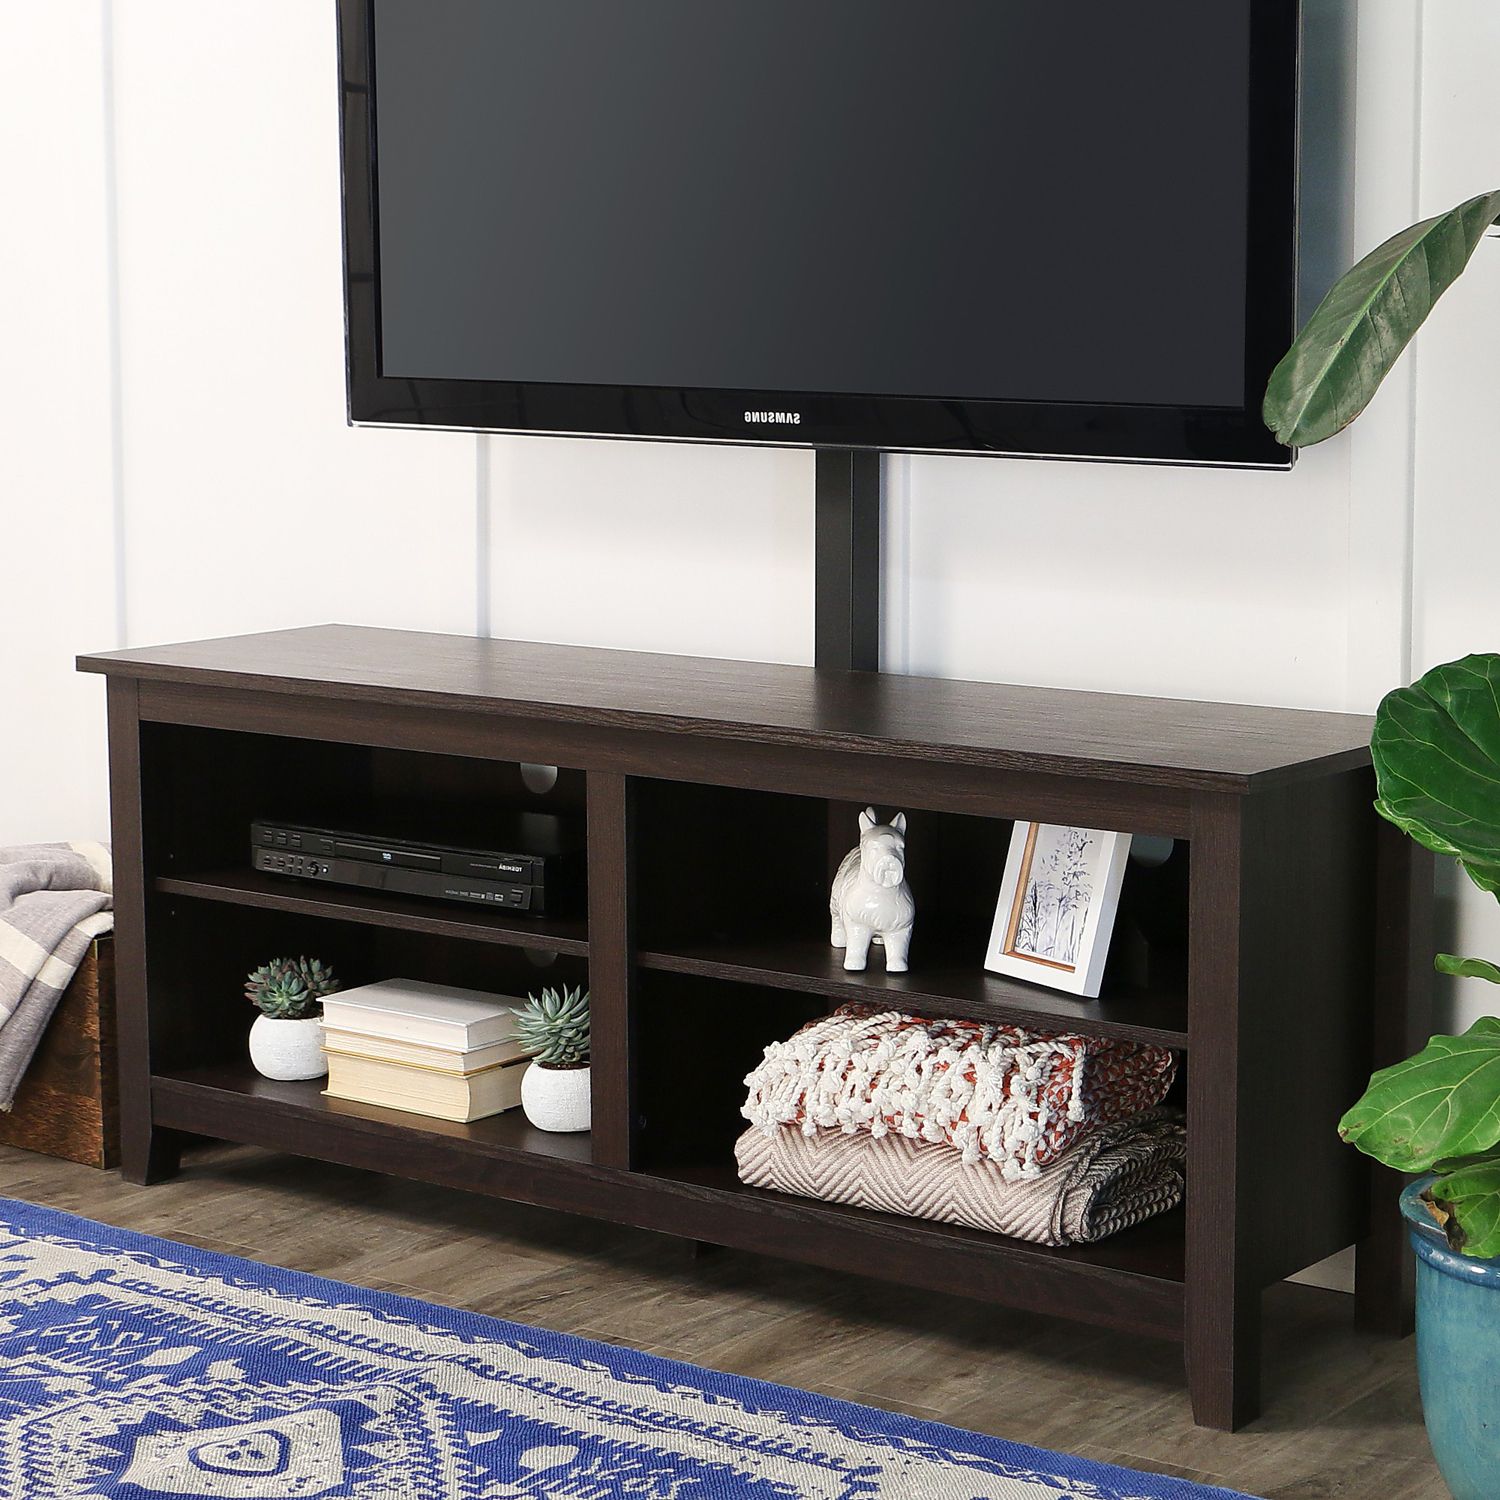 58" Espresso Tv Stand Console With Mount – Pier1 Imports For Farmhouse Tv Stands For 75" Flat Screen With Console Table Storage Cabinet (Gallery 6 of 20)